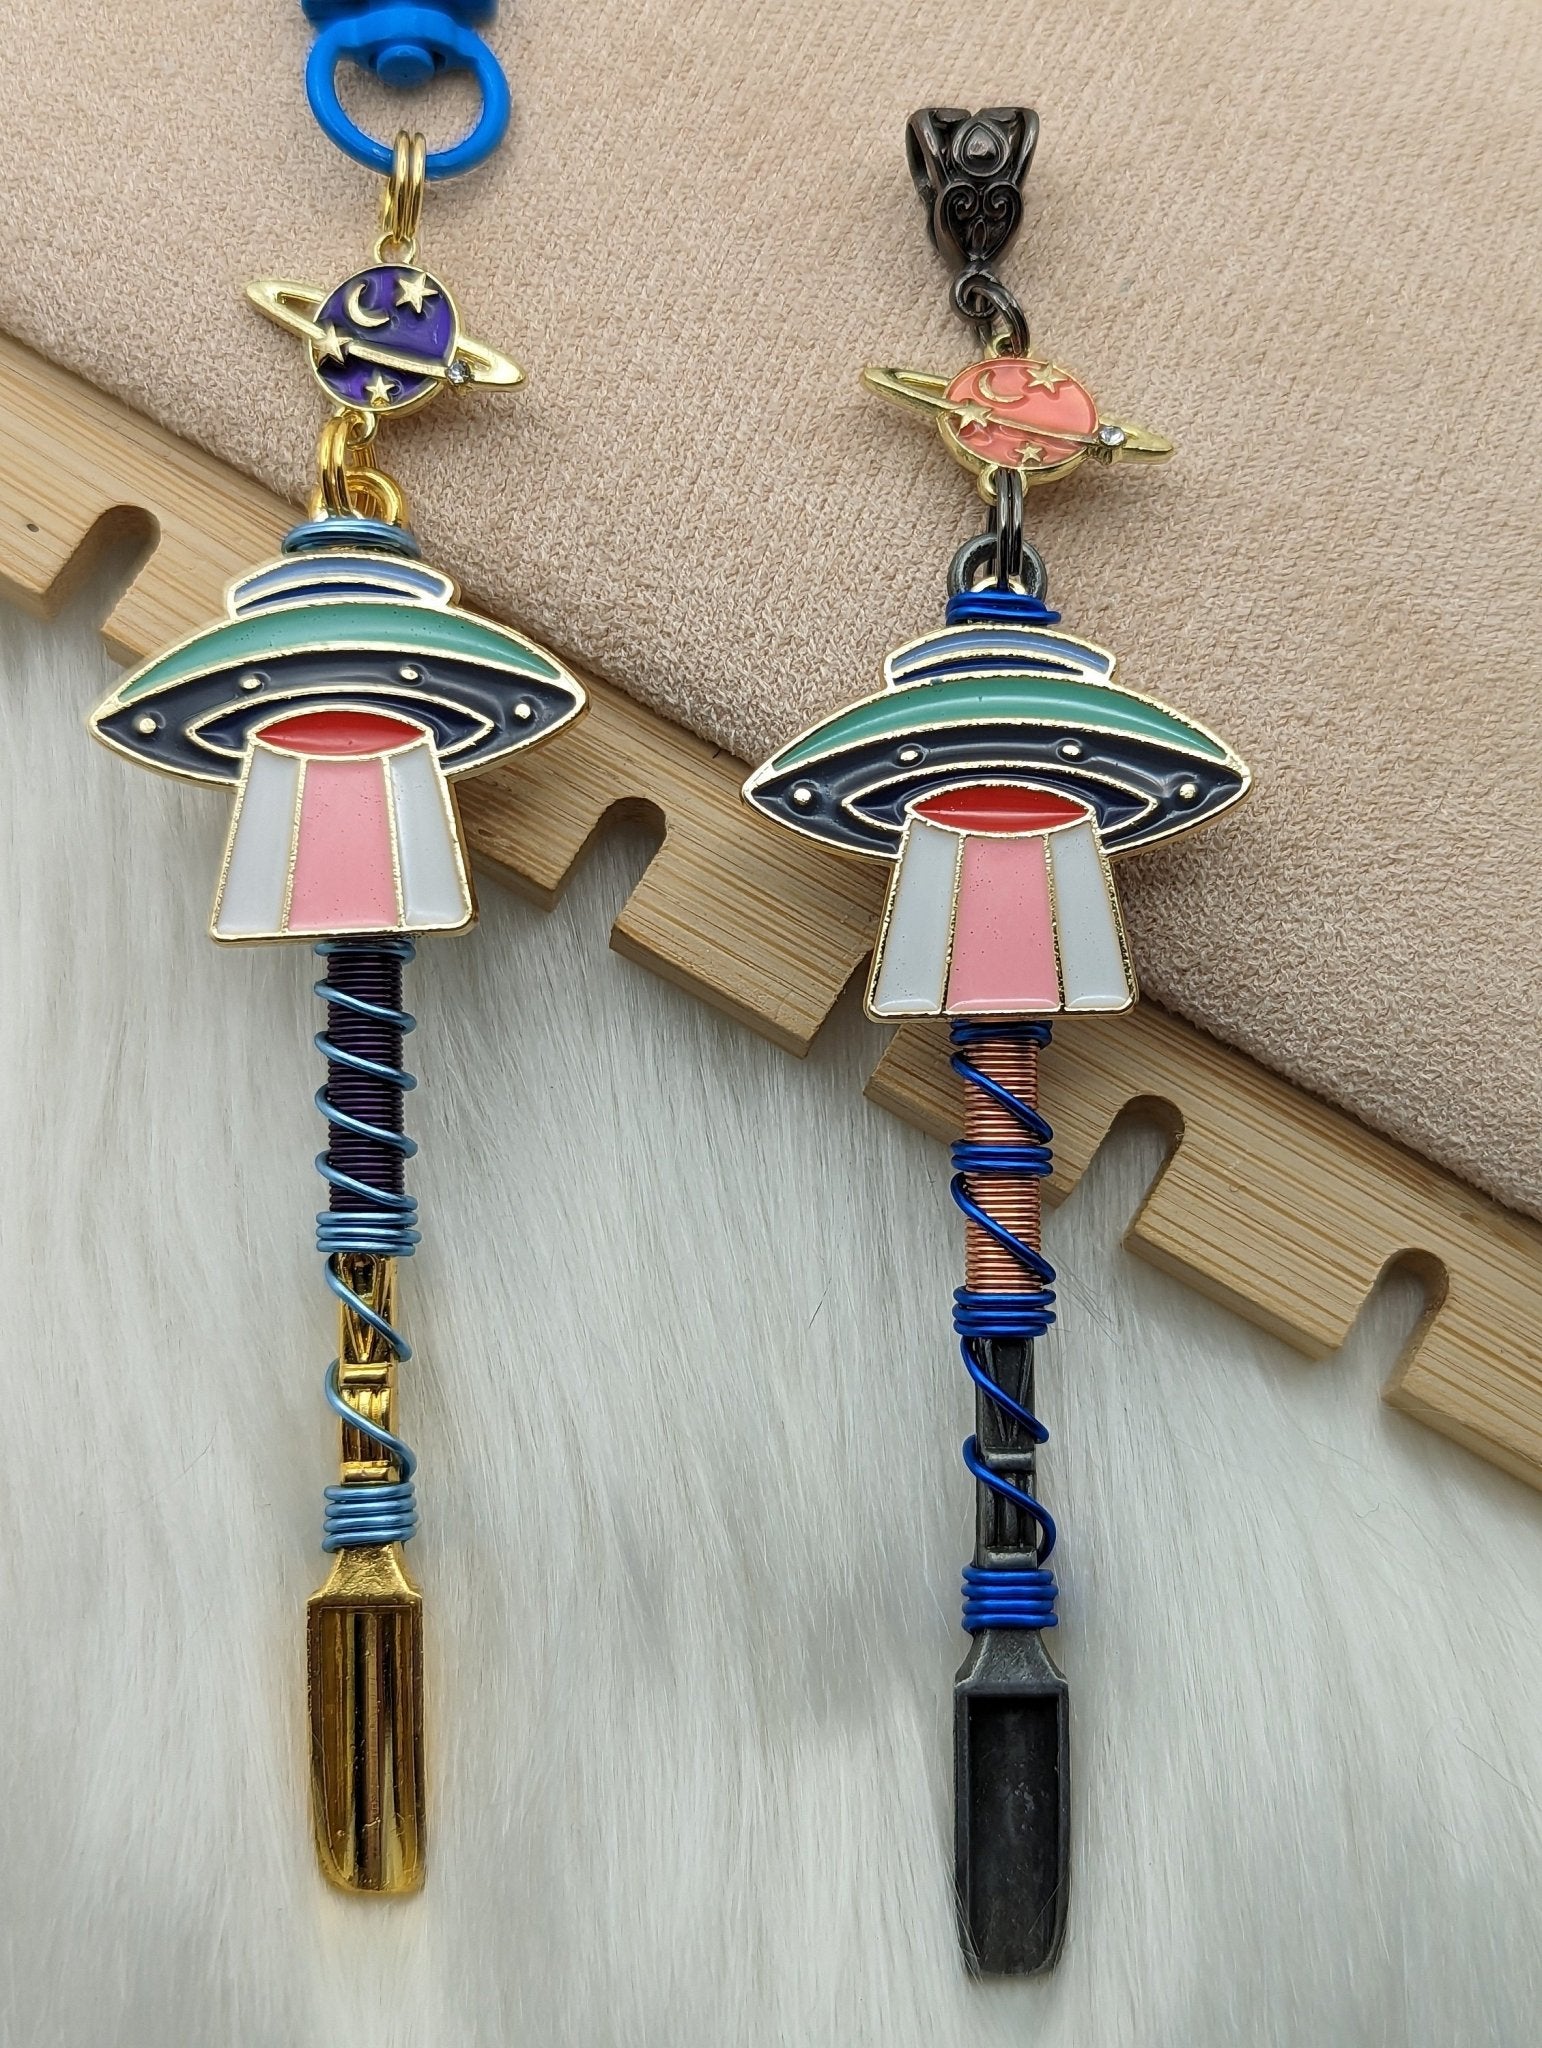 UFO Wire Wrapped Mini Spoon Necklaces and Keychains - Groove Spoons